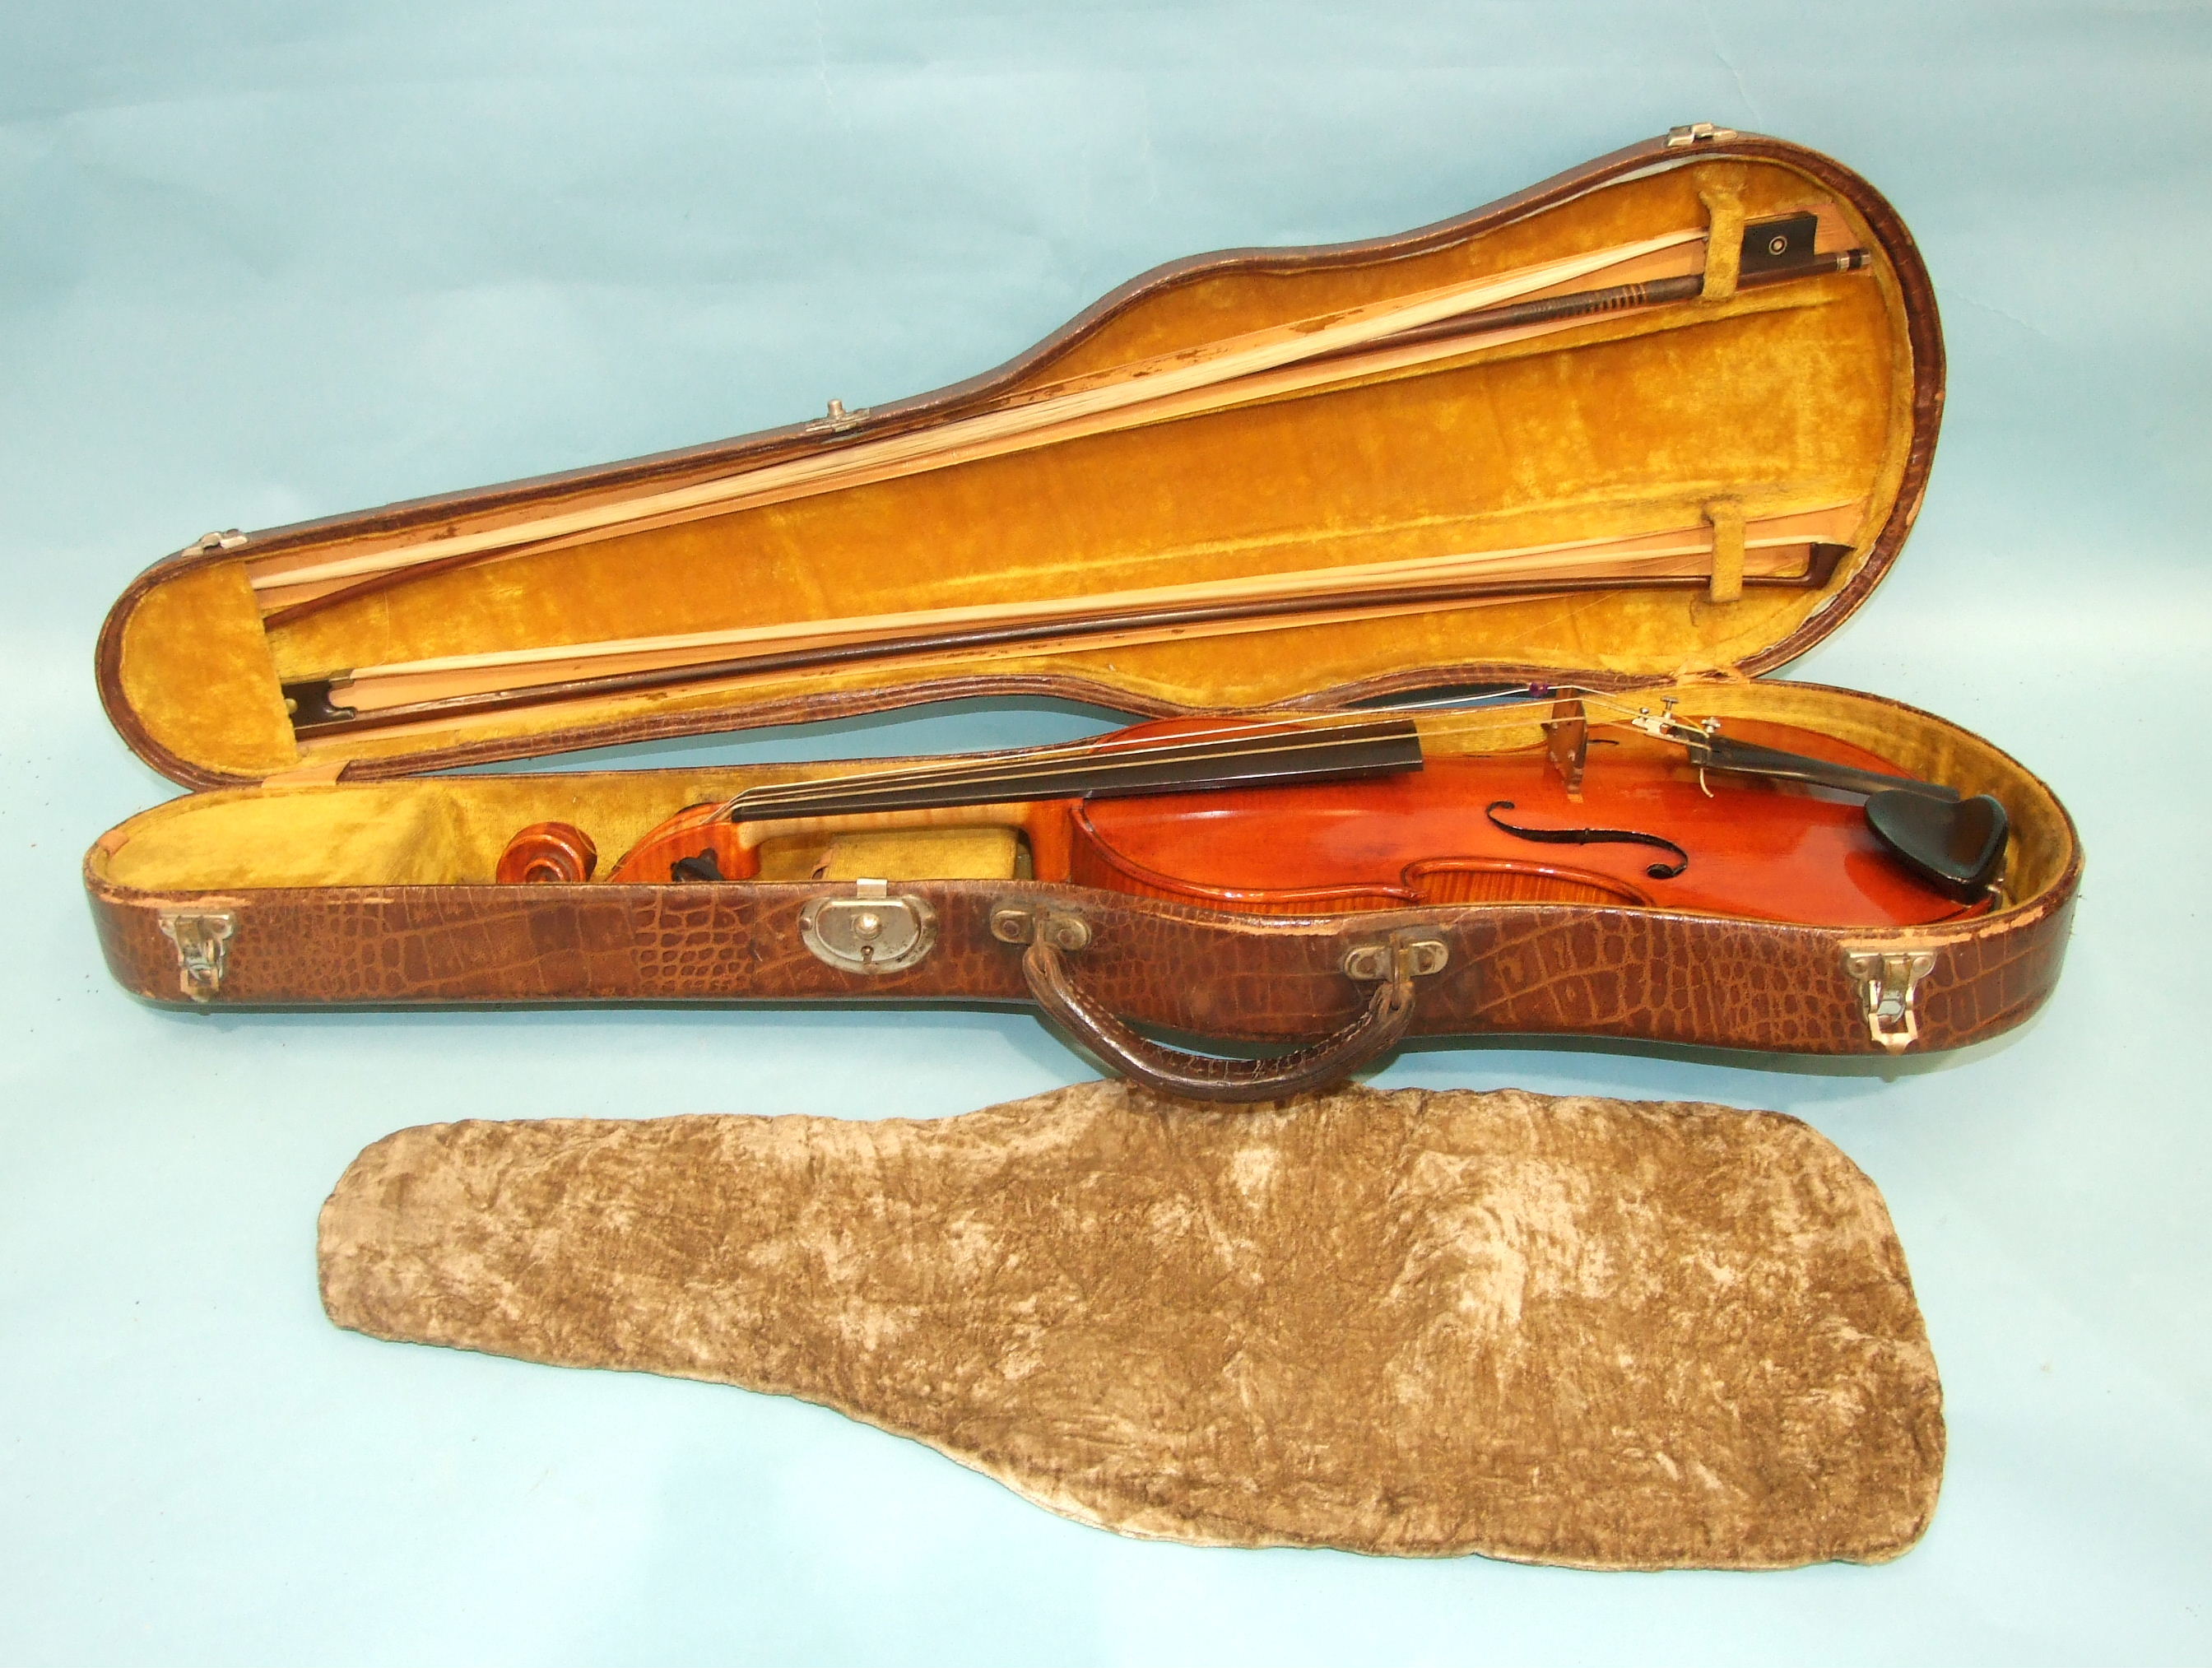 A violin by William Samuel Day, Plymouth, labelled "W S Day, Plymouth Faciebat Anno 1925", with